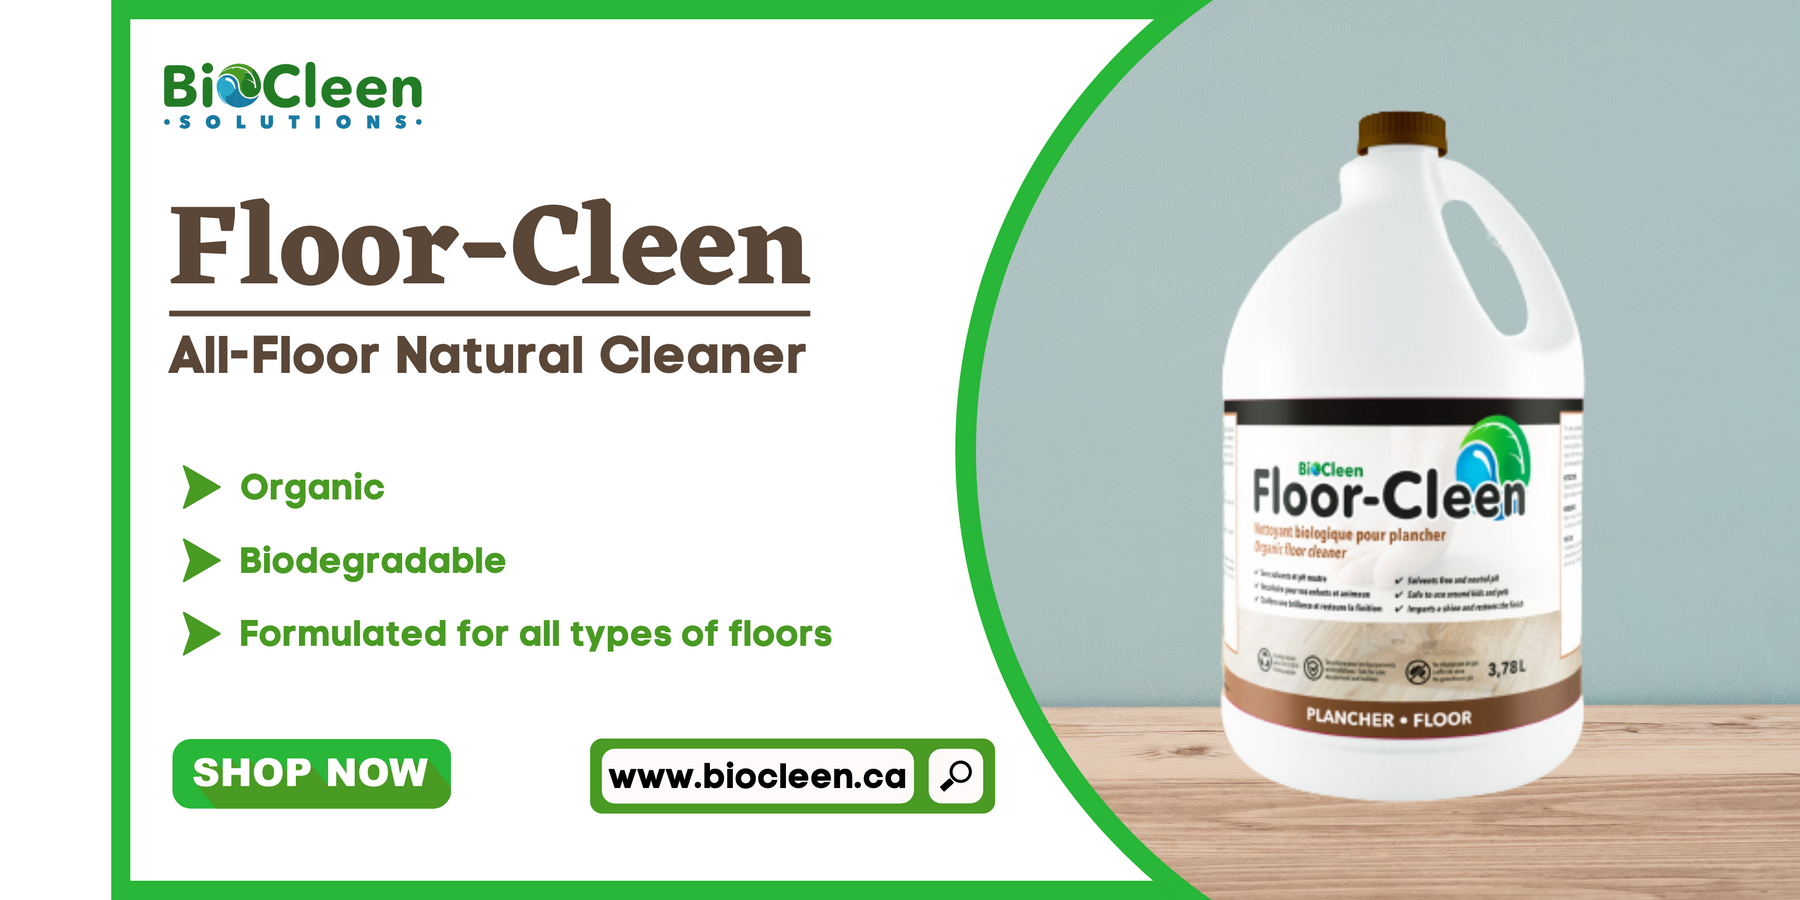 How our All-Floor Natural Cleaner is organic, biodegradable, specially formulated for all types of floors?